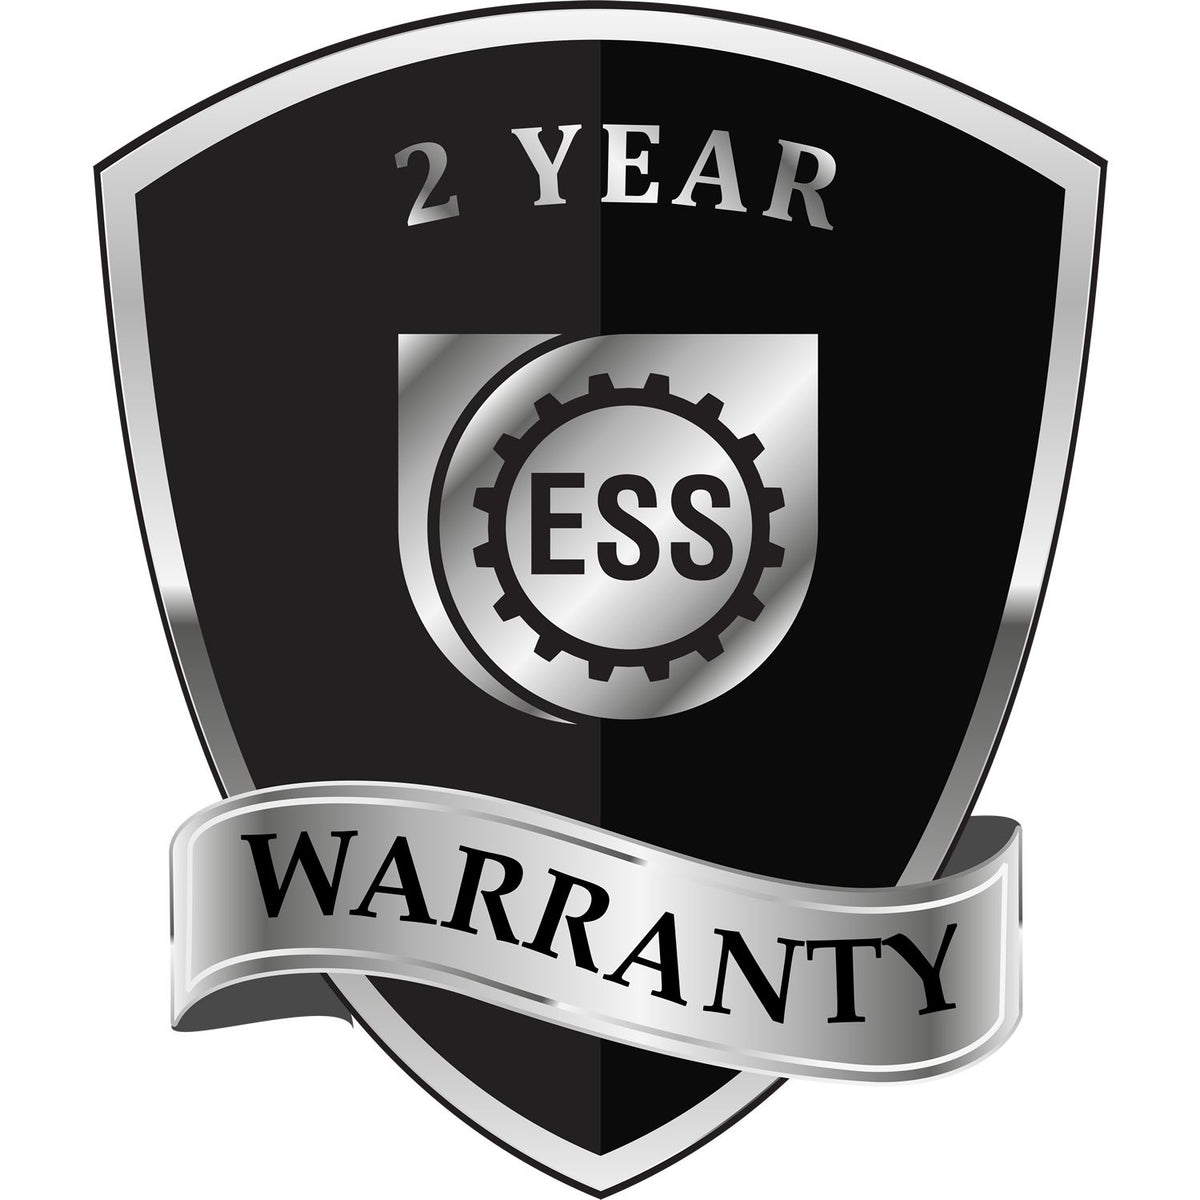 A black and silver badge or emblem showing warranty information for the Soft Alaska Professional Geologist Seal